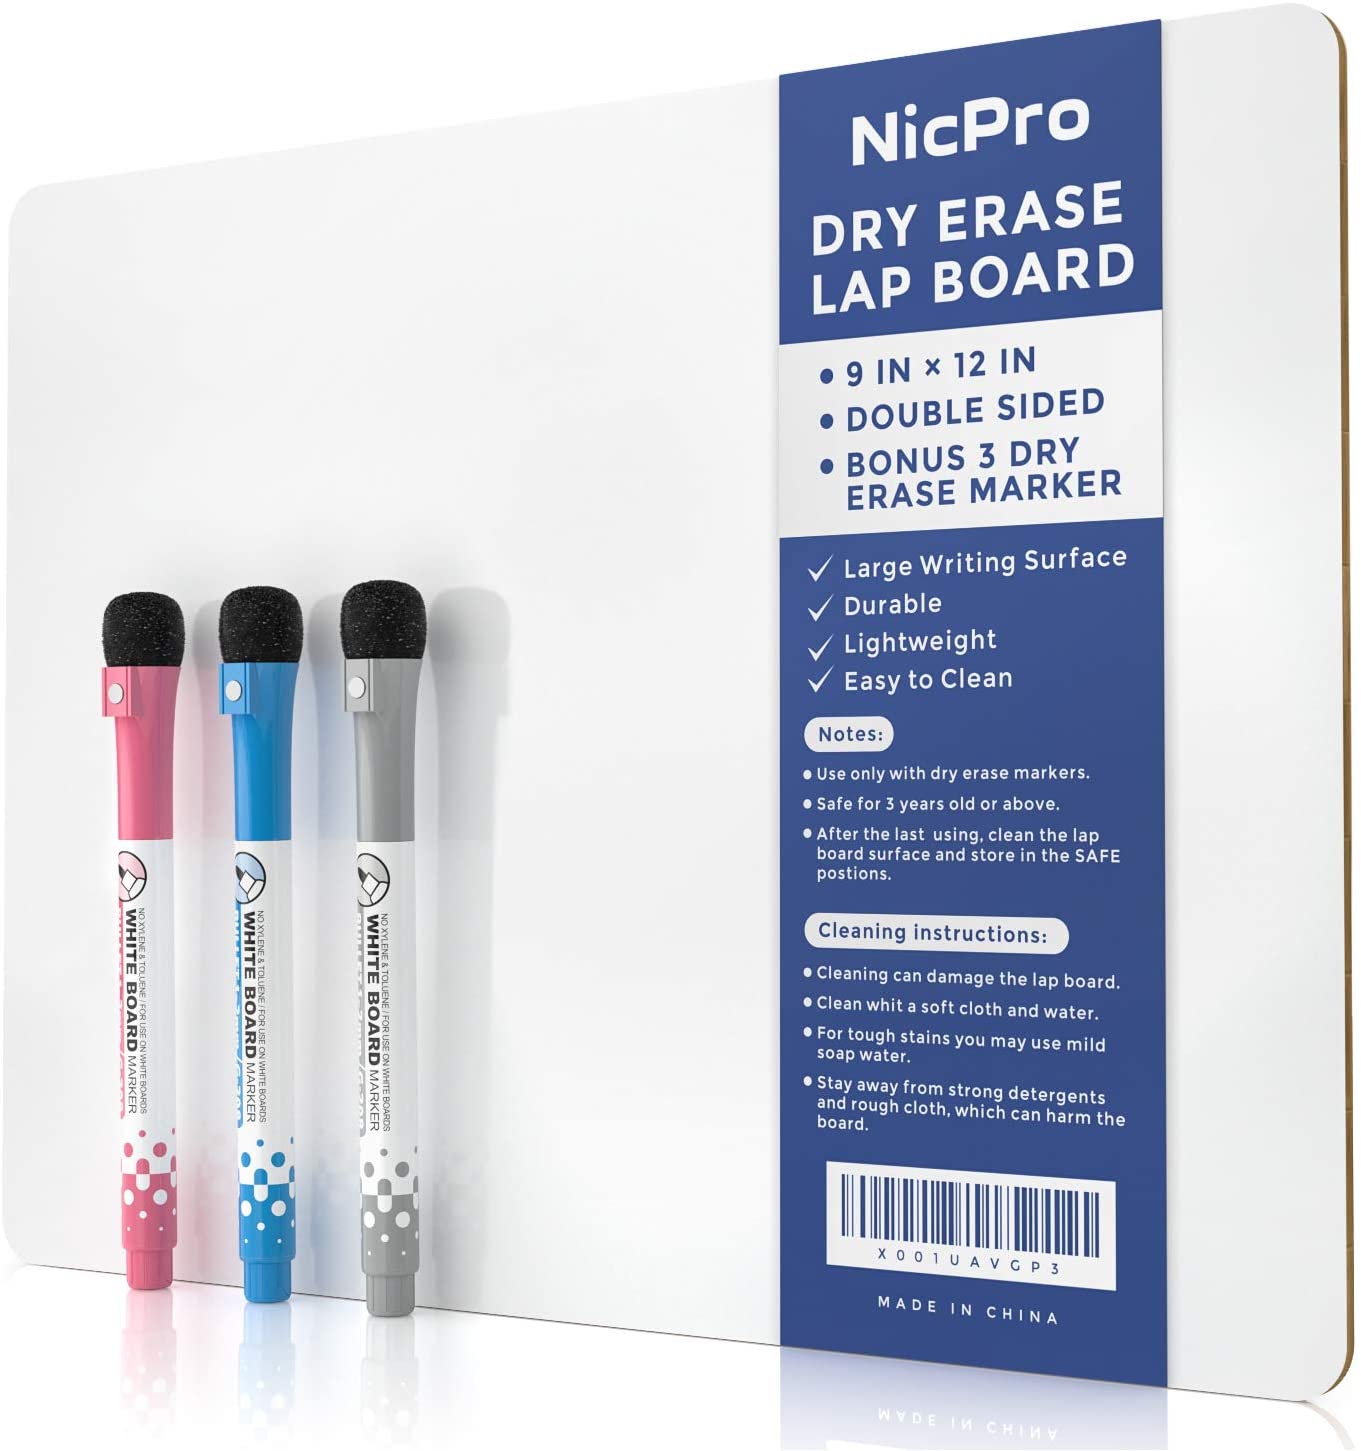 Nicpro 9 x 12 inches Lapboard Small Dry Erase Lap Board Double Sided w